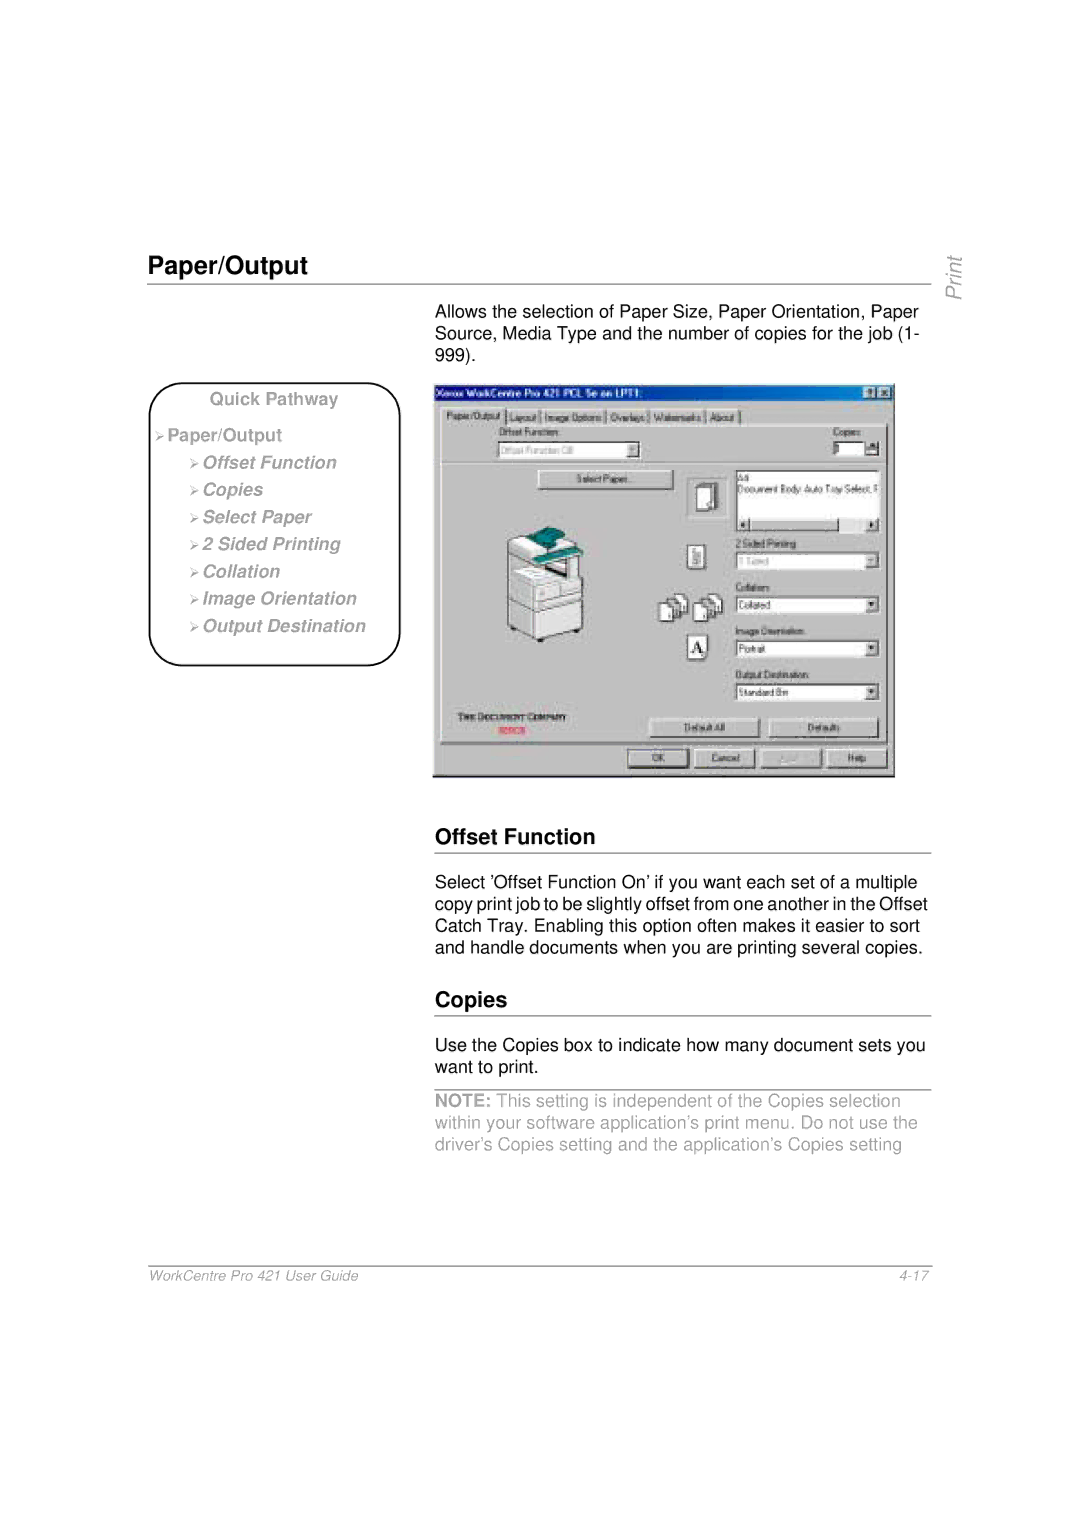 Xerox 421 manual Paper/Output, Offset Function, Copies 